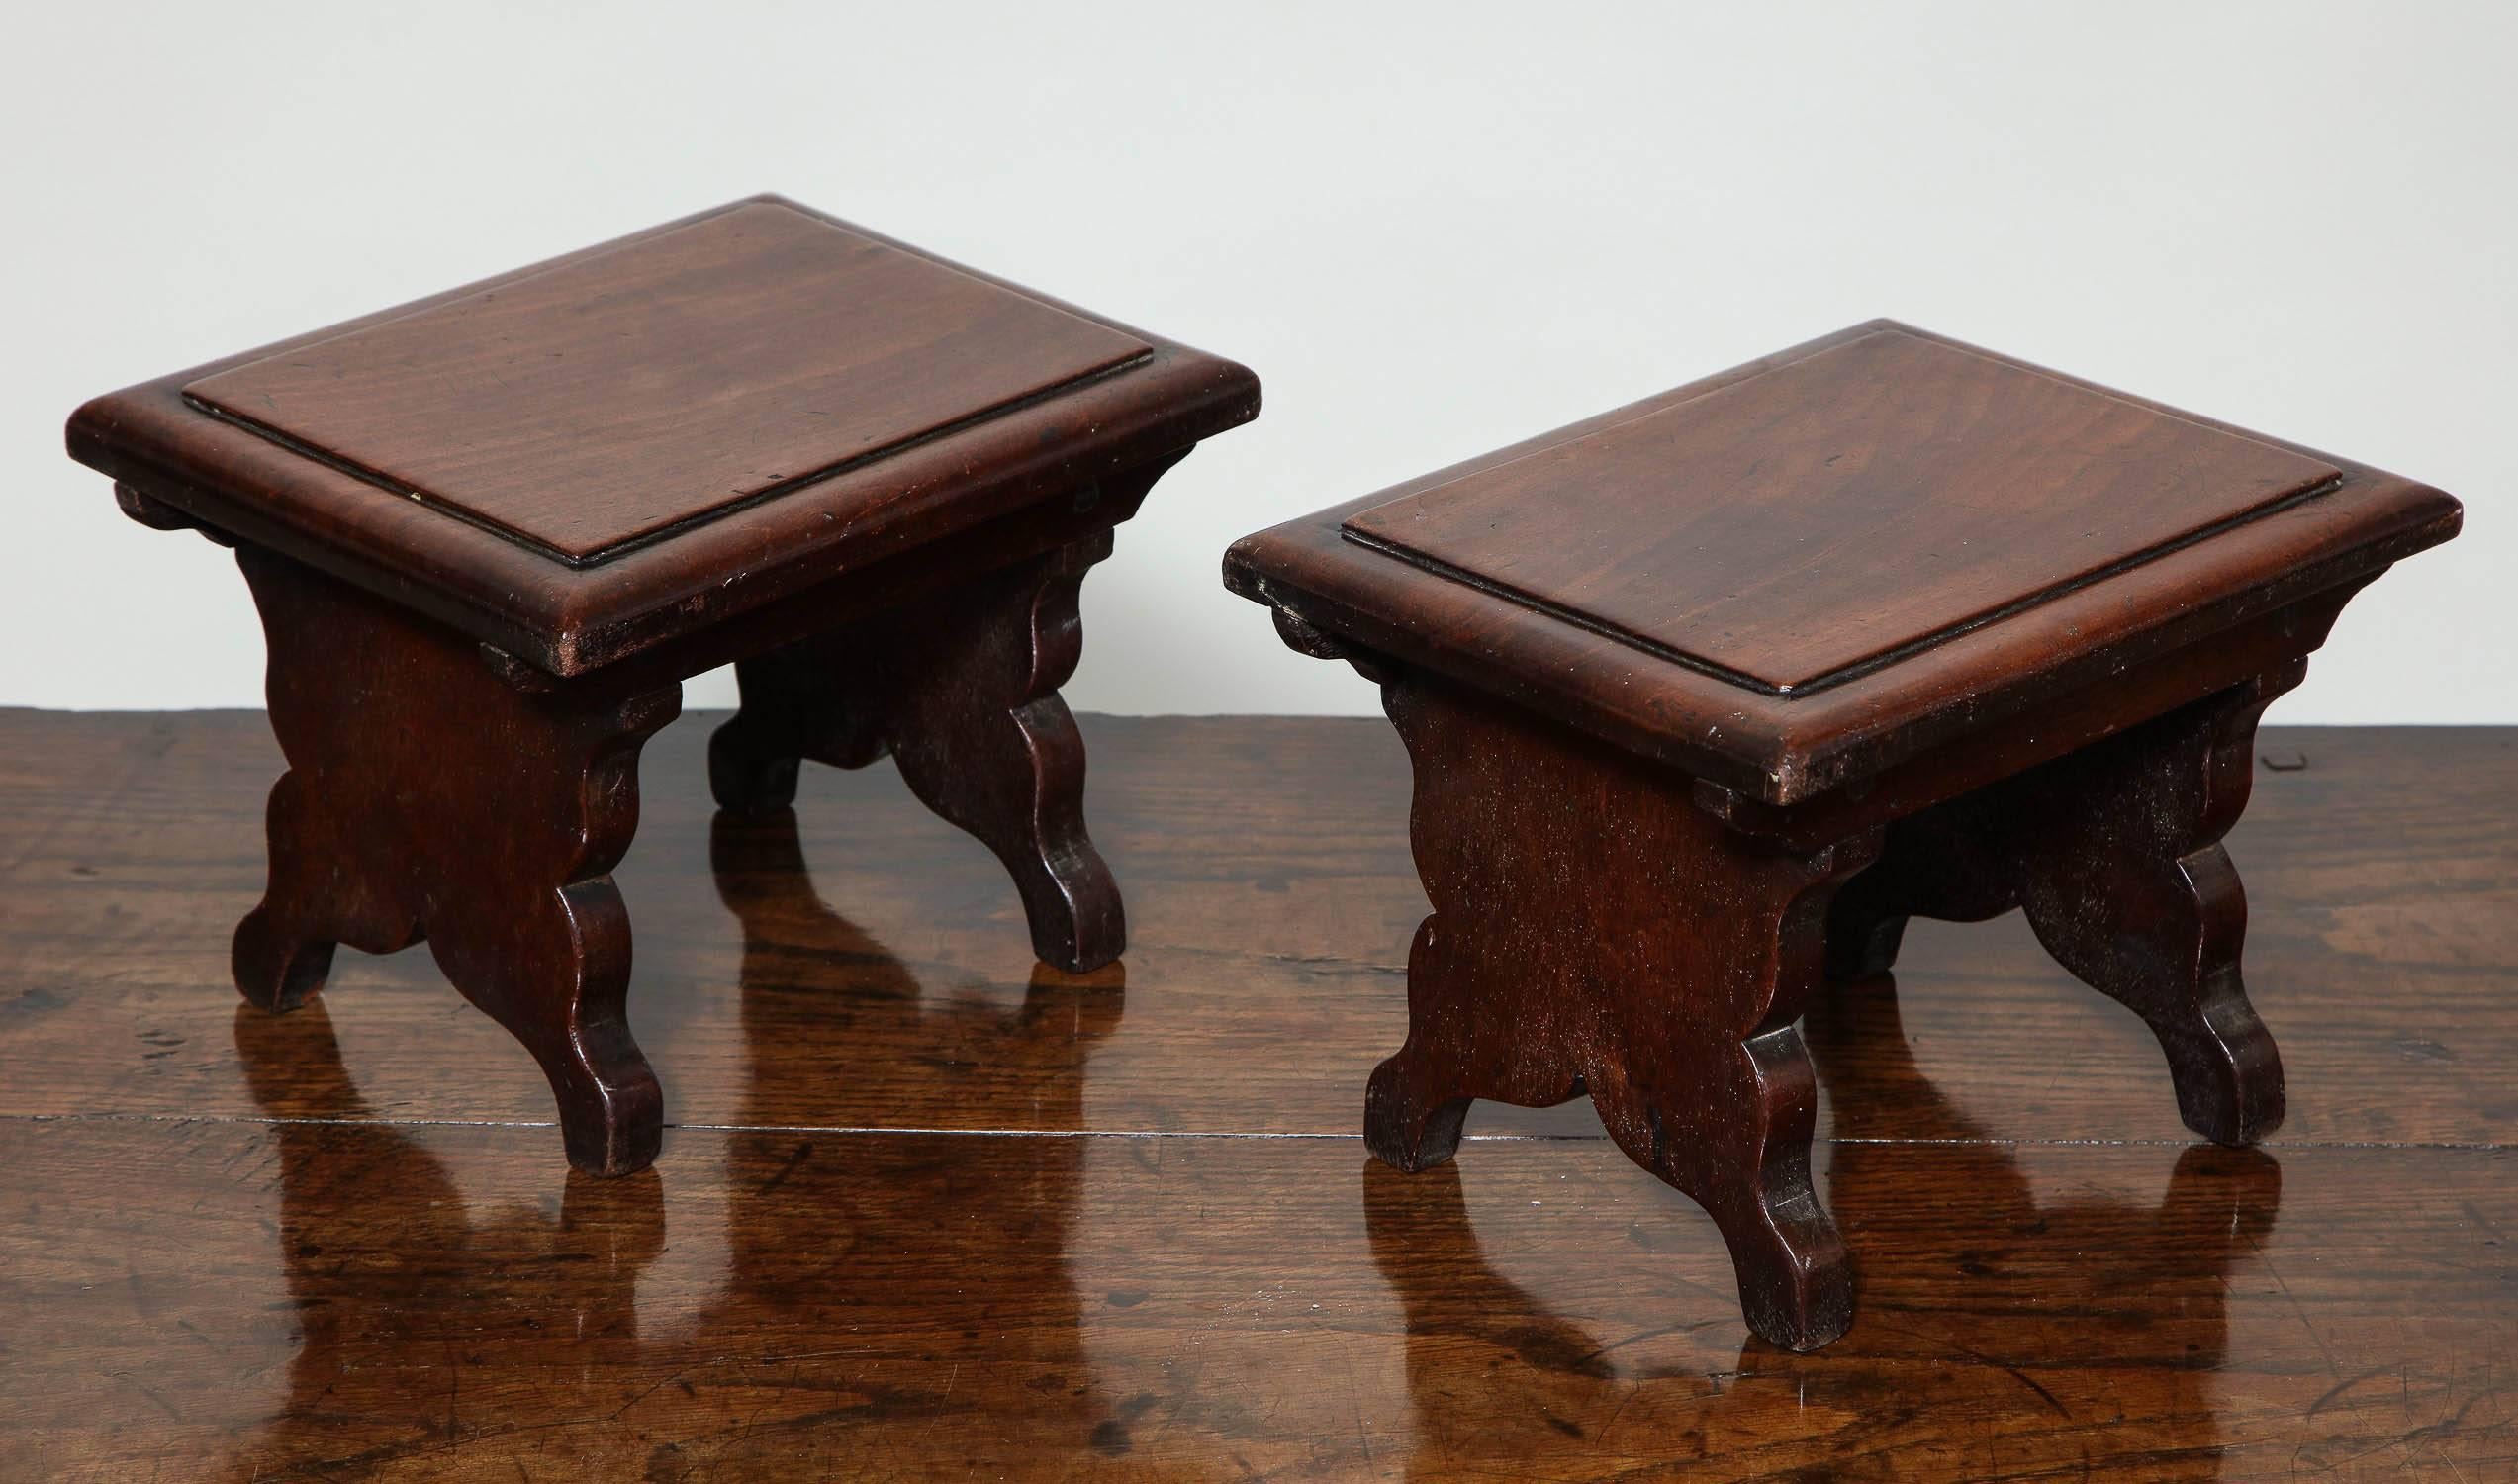 Very fine and rare pair of George II period mahogany dresser stools, the single board tops of dense mahogany with thumb molded edge over scalloped trestle ends with boarded sides.
Very attractive and useful in their own right, dresser stools have